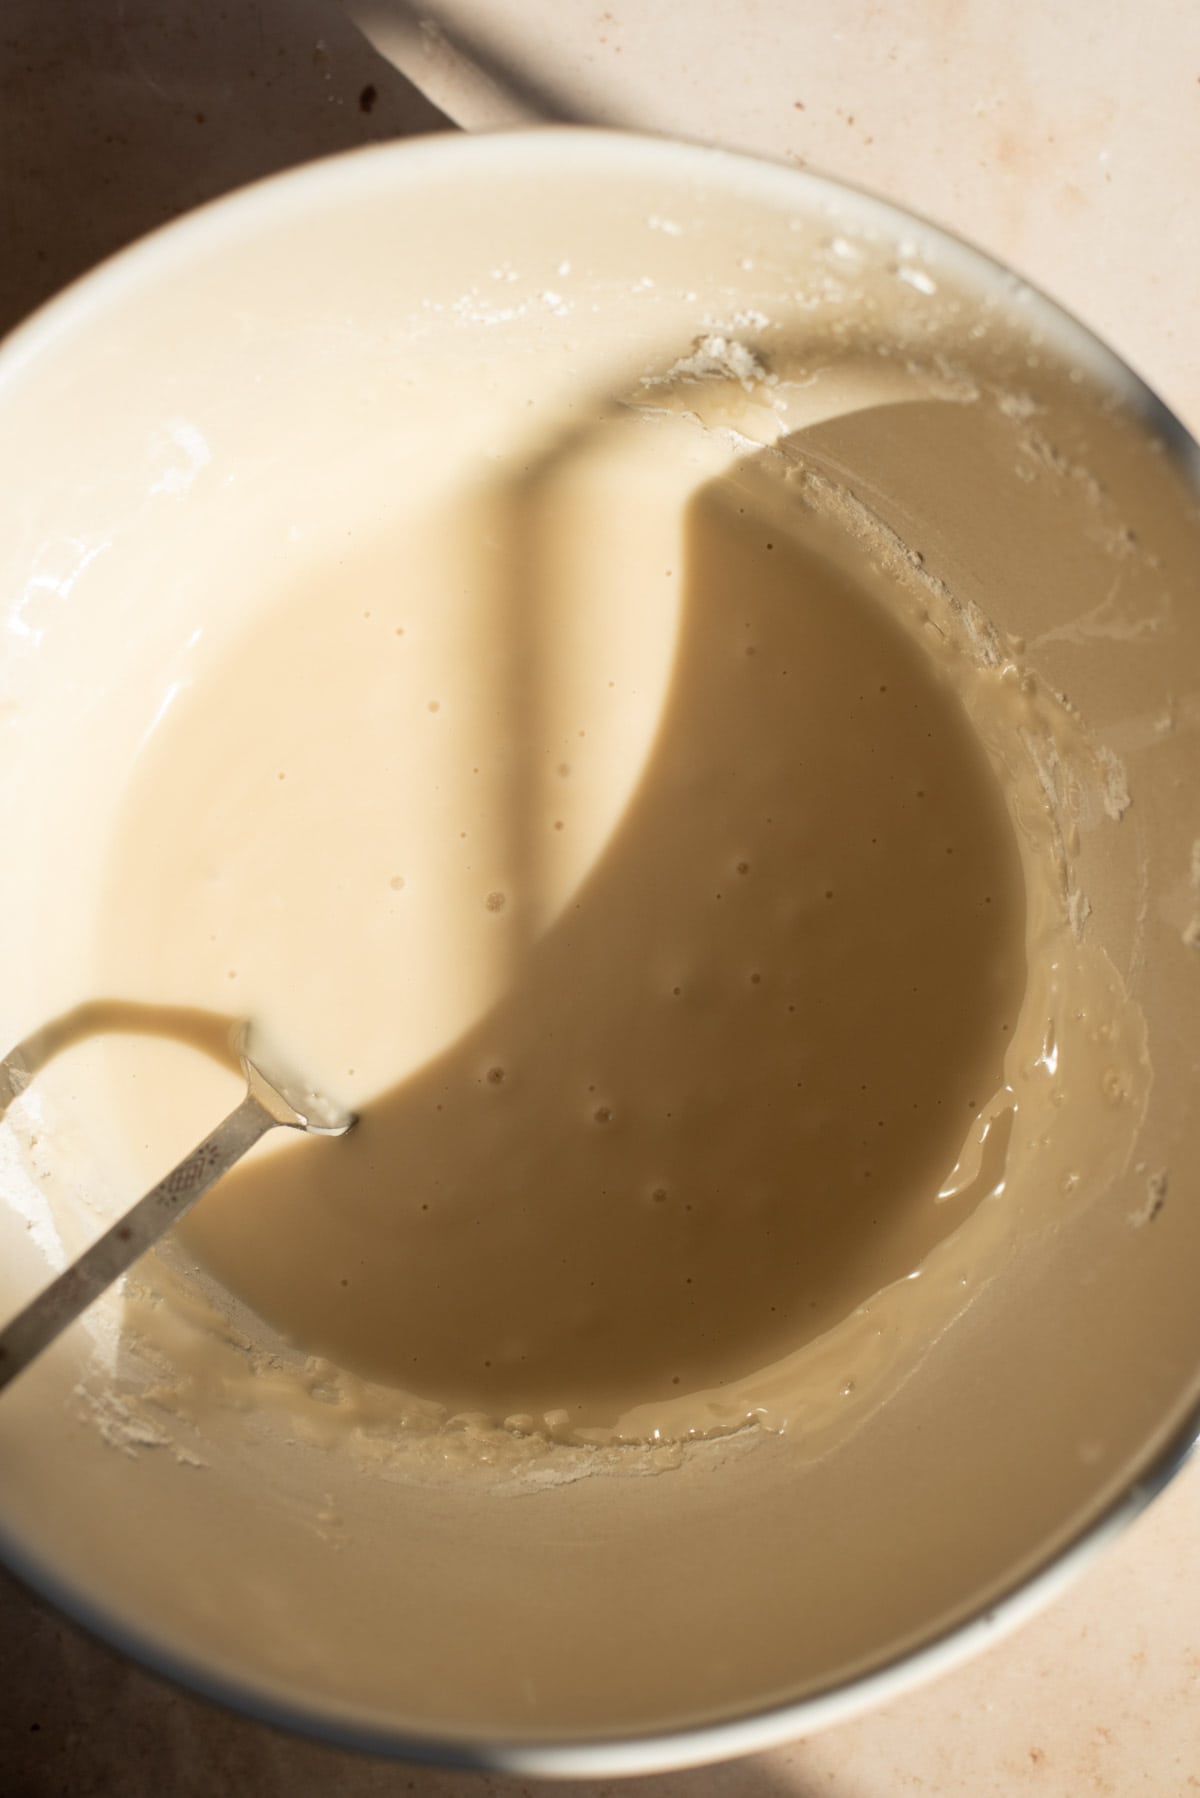 The glaze in a cream mixing bowl.